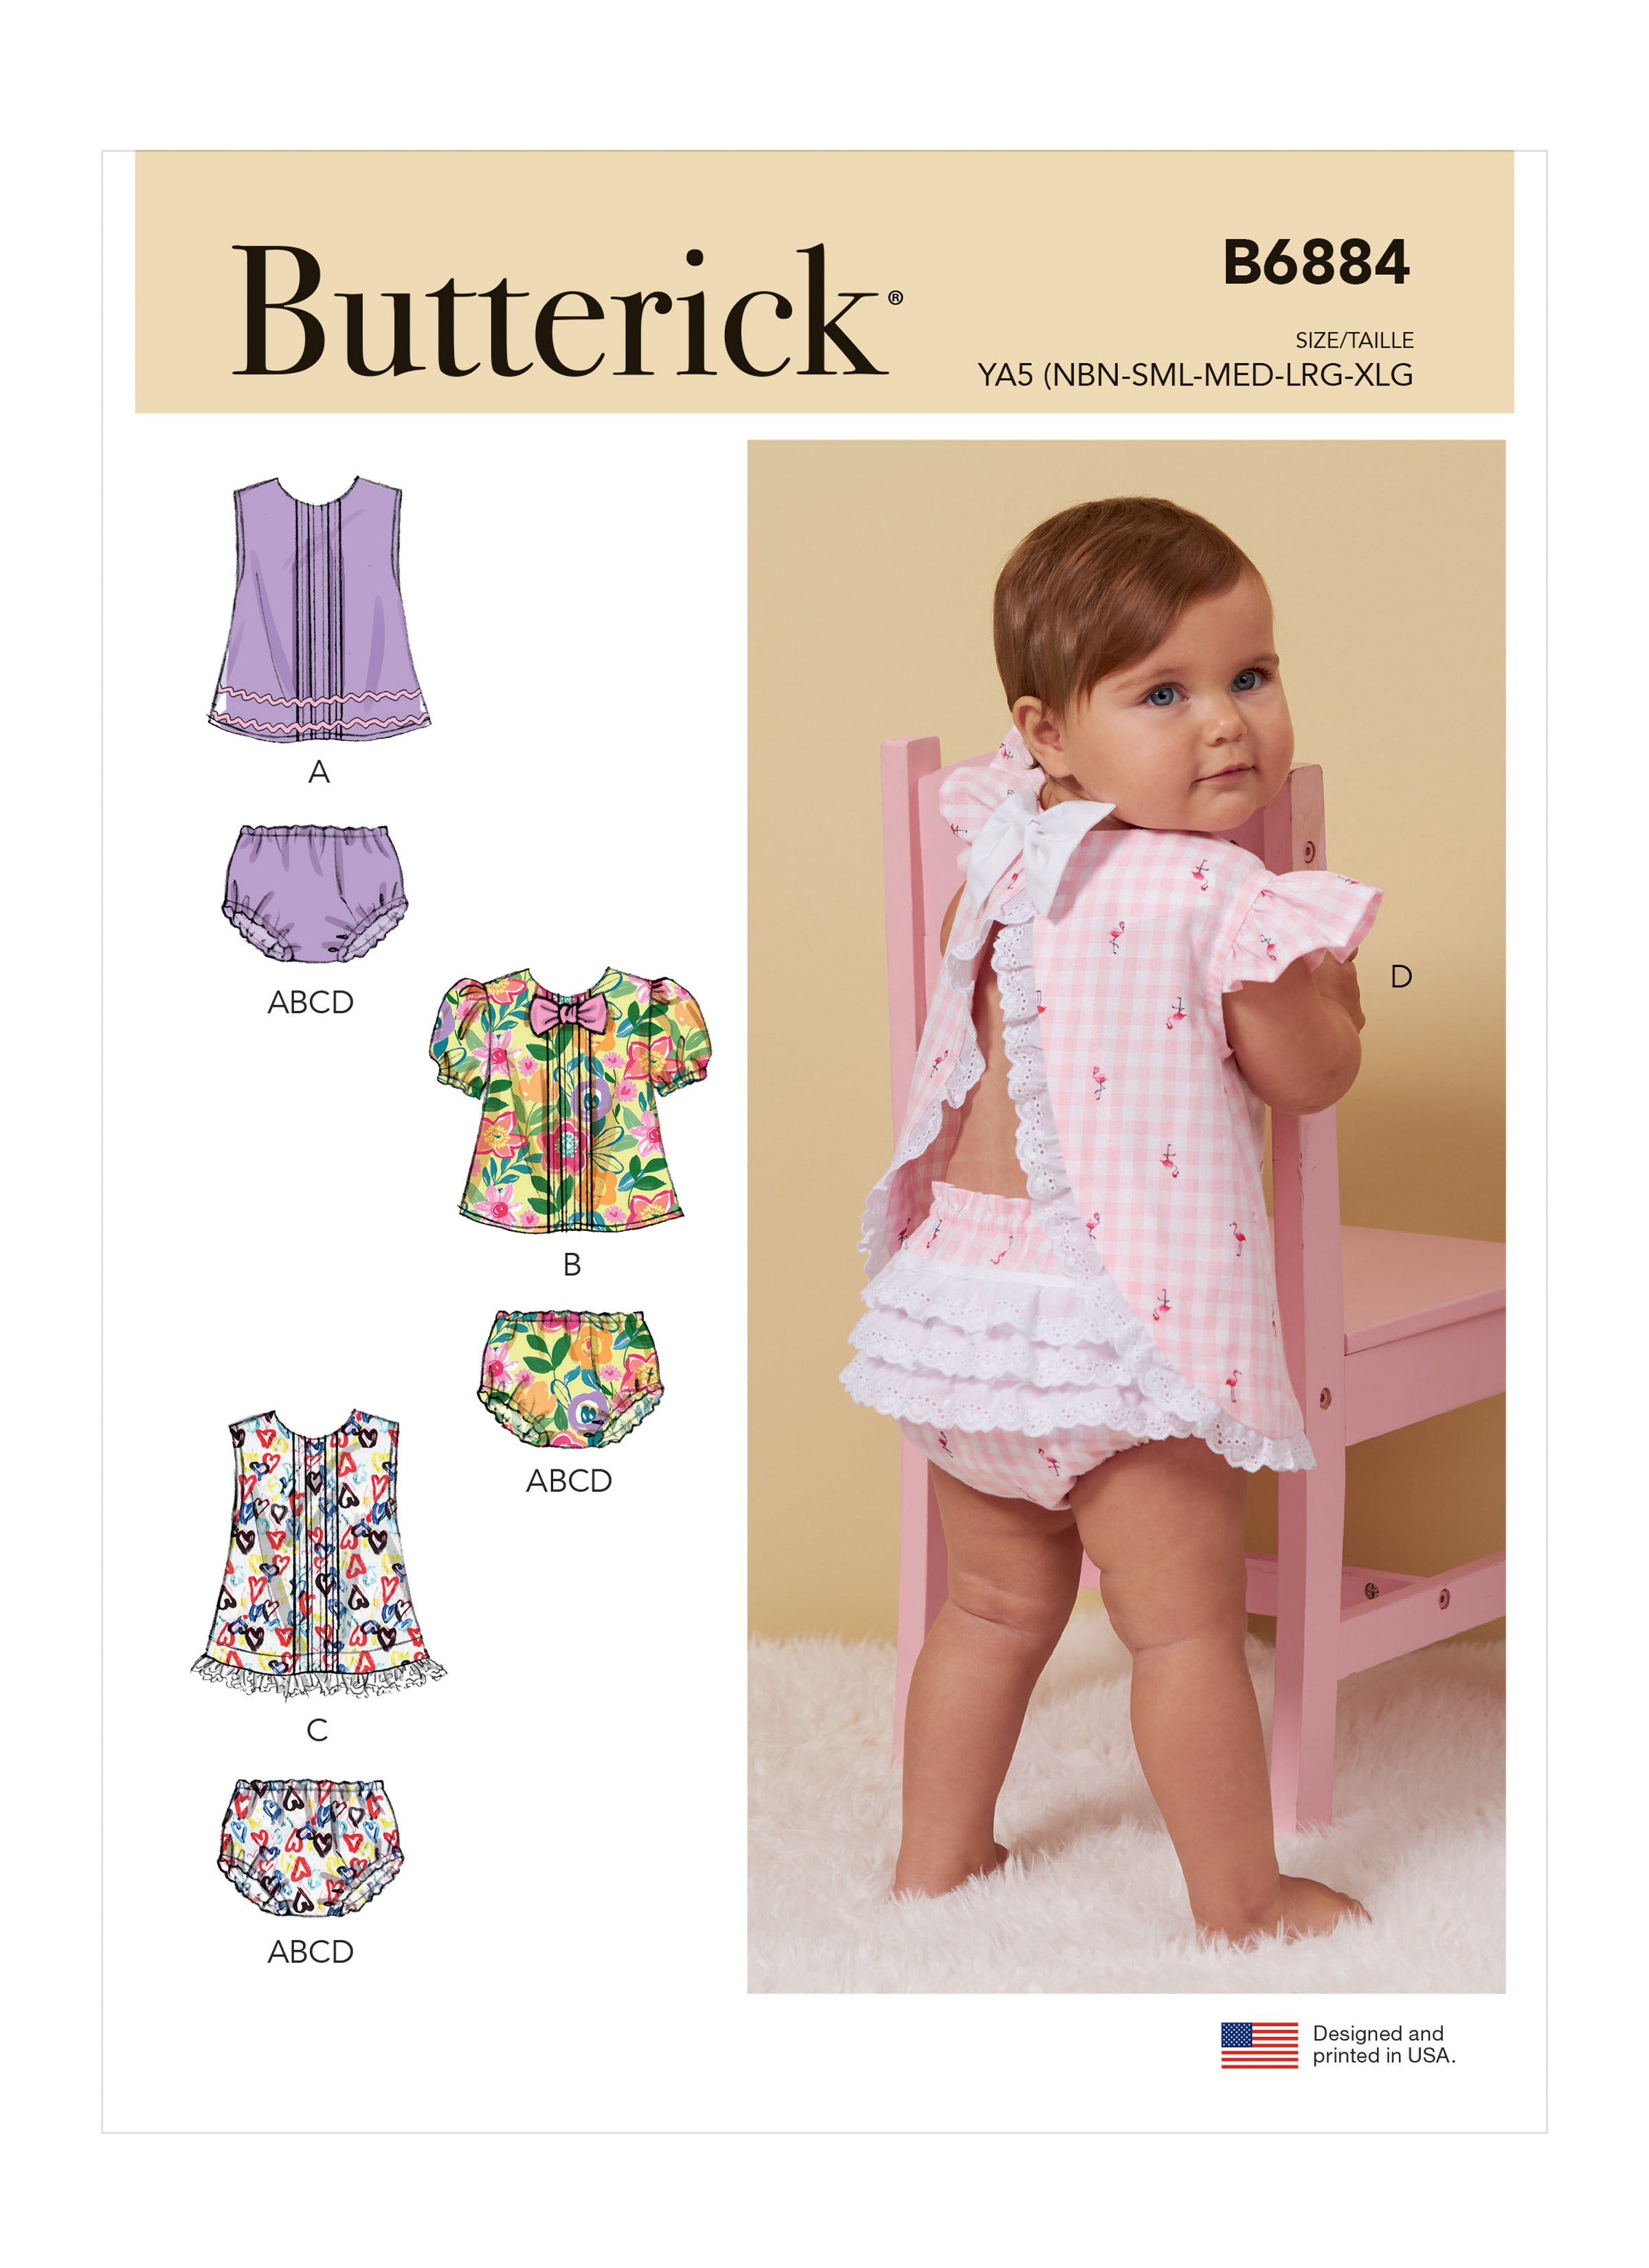 Butterick 6884 Infants' Top and Panties sewing pattern from Jaycotts Sewing Supplies